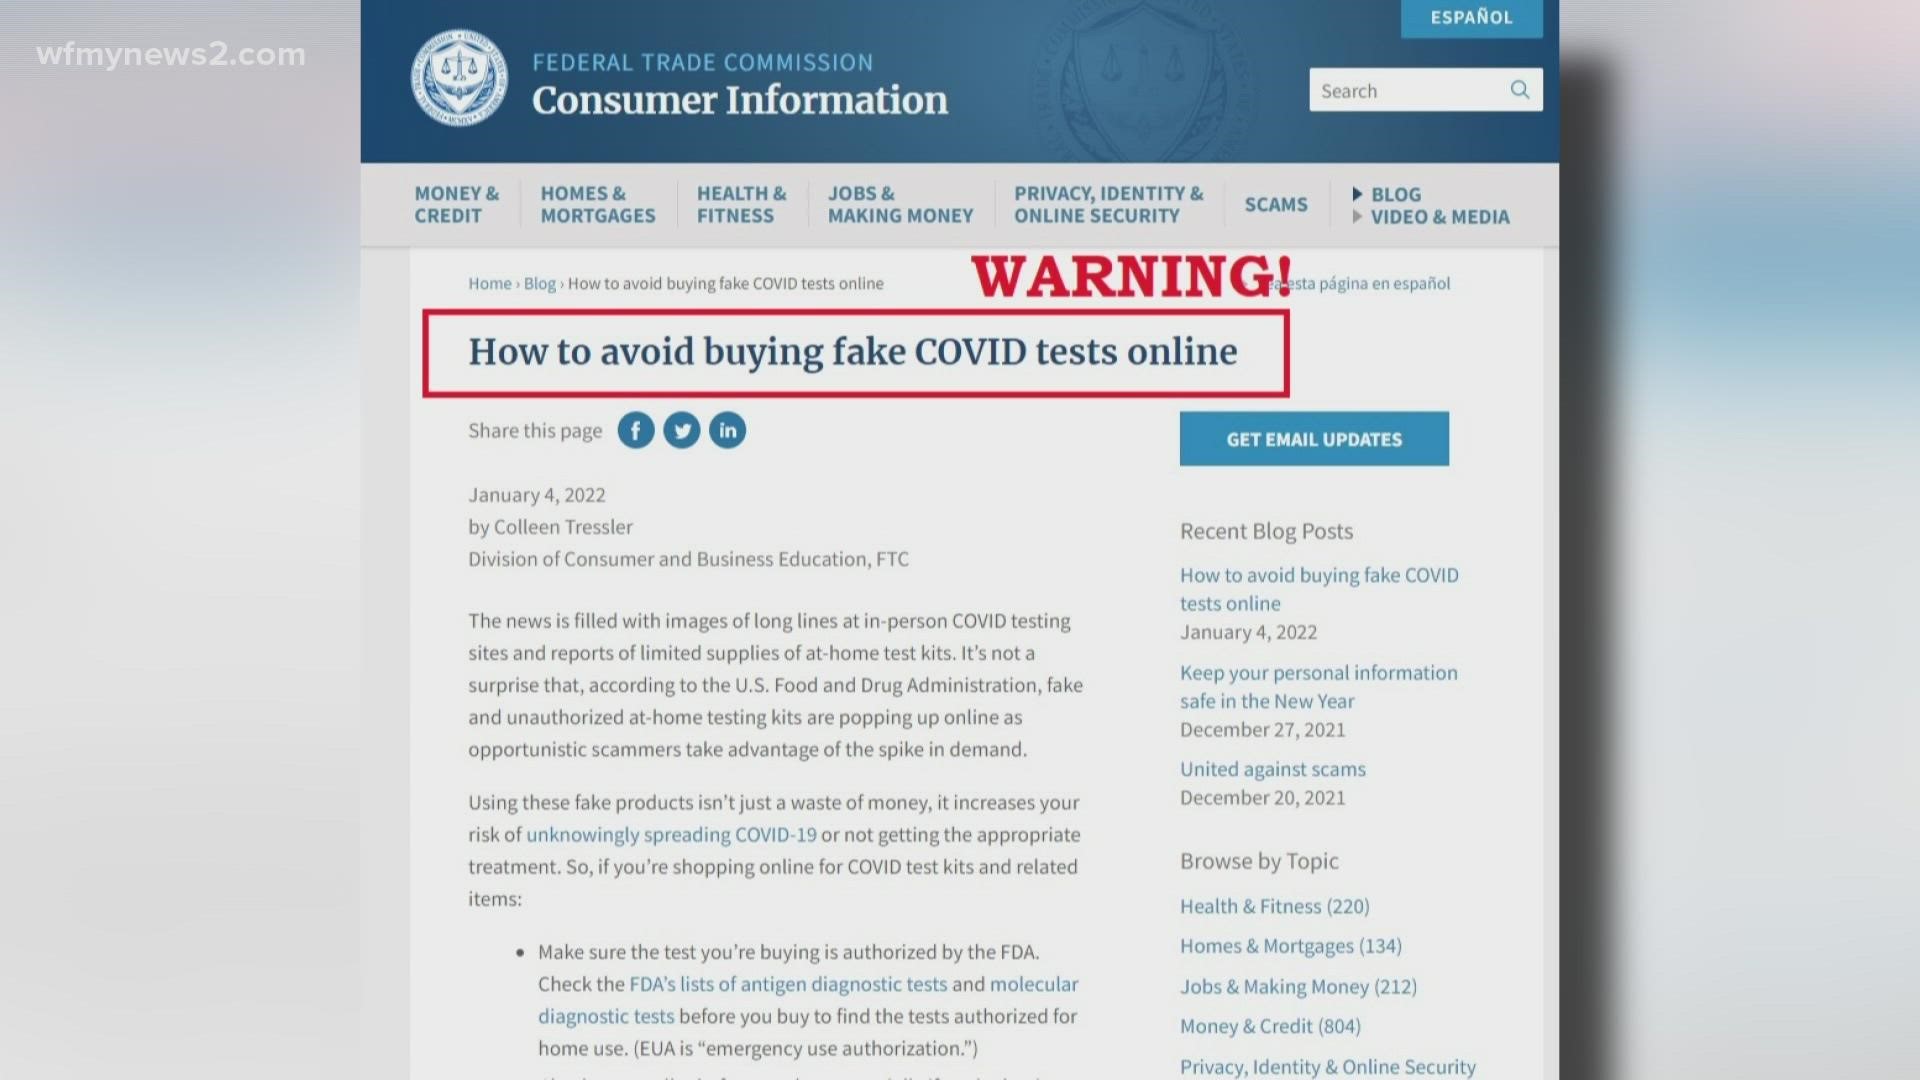 Scammers may try to sell you fake COVID-19 tests as supply remains limited. Here’s how to protect yourself.